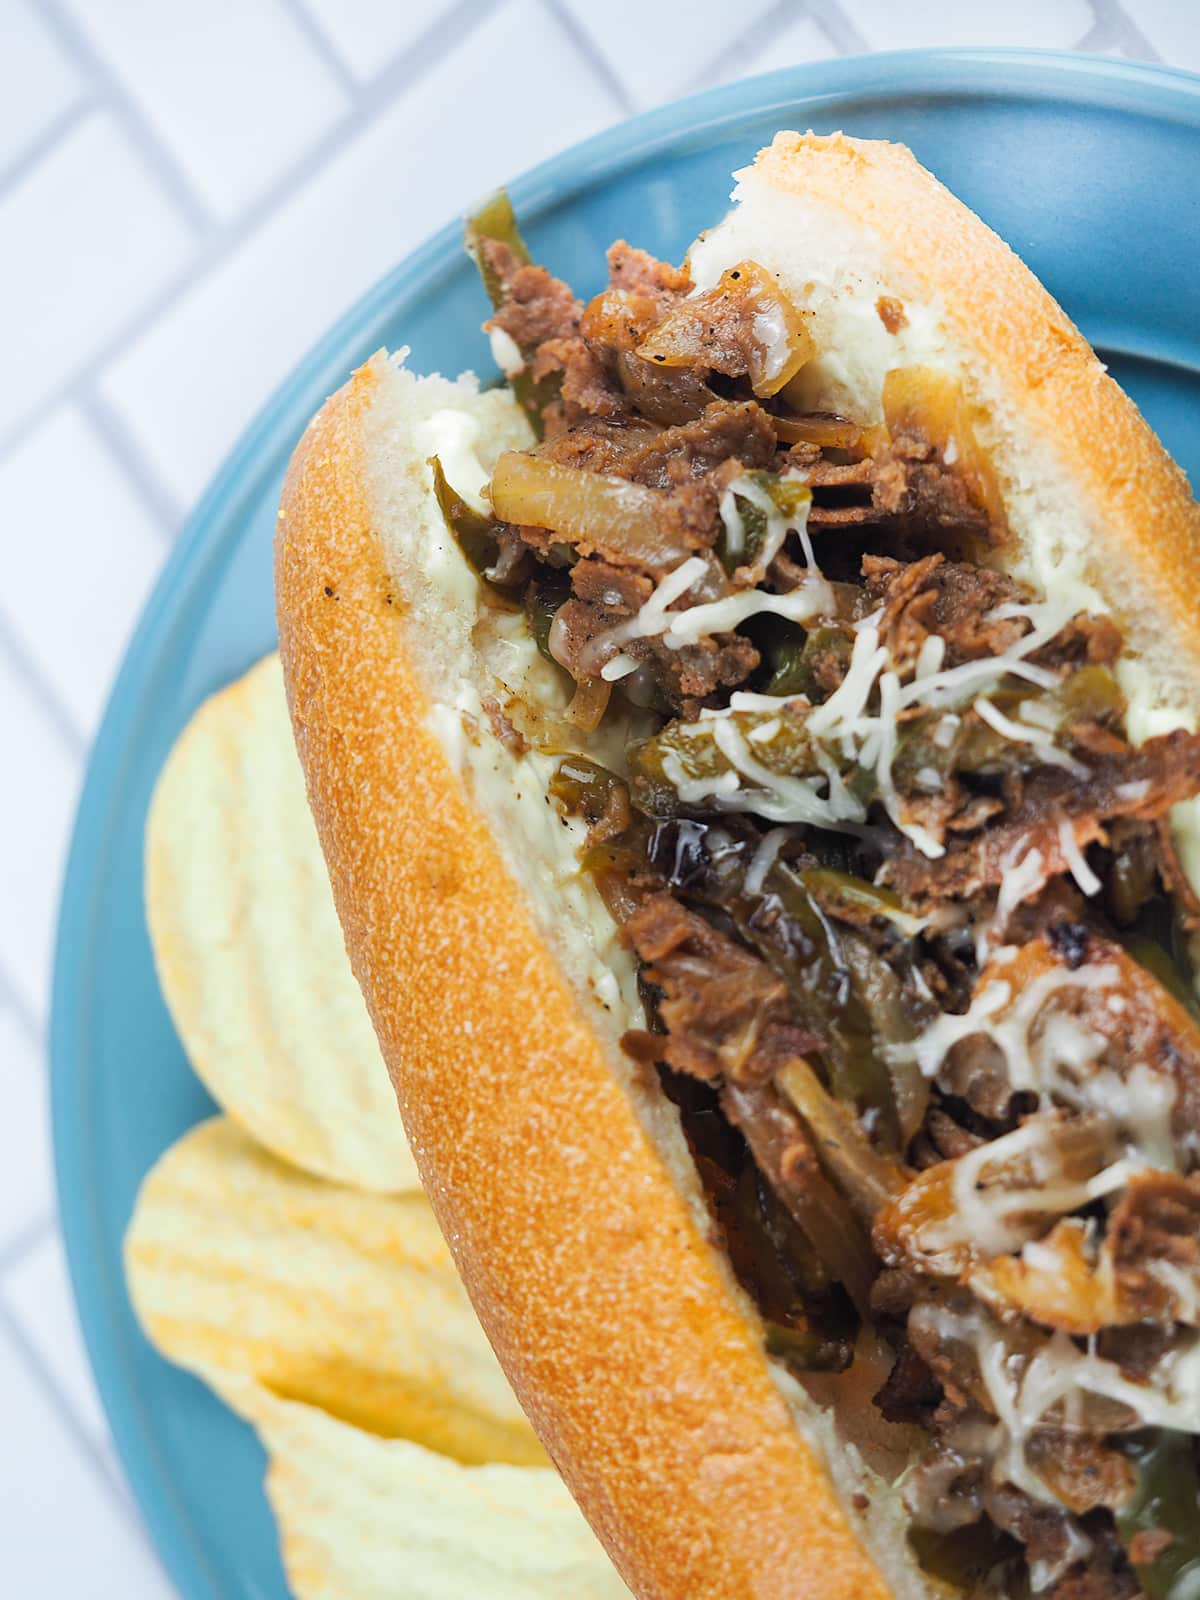 philly cheesesteak on blue plate with chips
